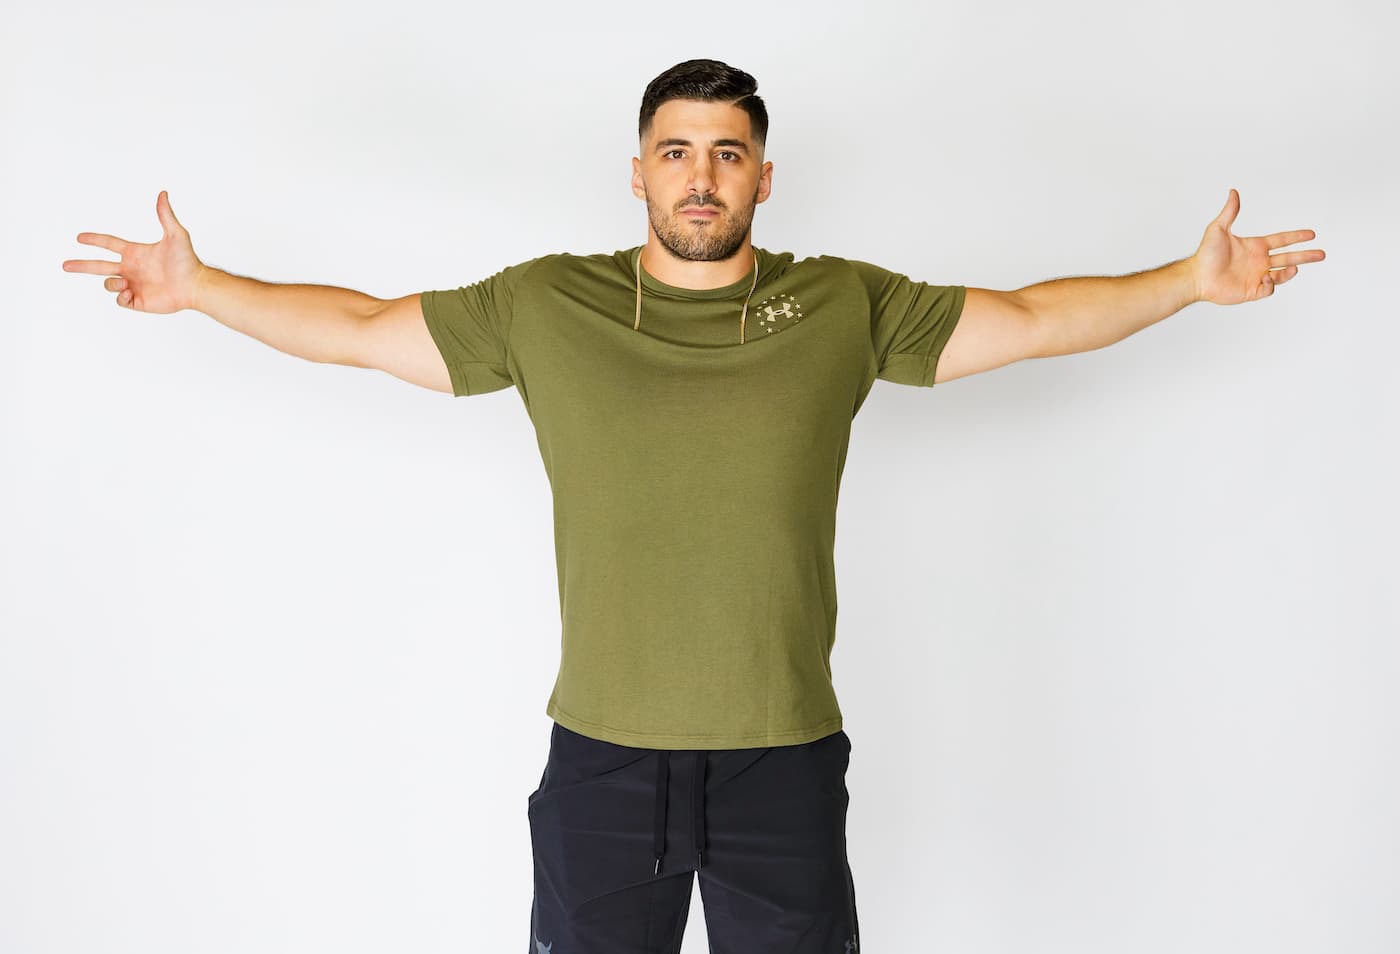 Nick “NickMercs” Kolcheff Joins Under Armour Roster In A Partnership That Bridges Fitness And Gaming, Reflecting Today’s Modern Athlete